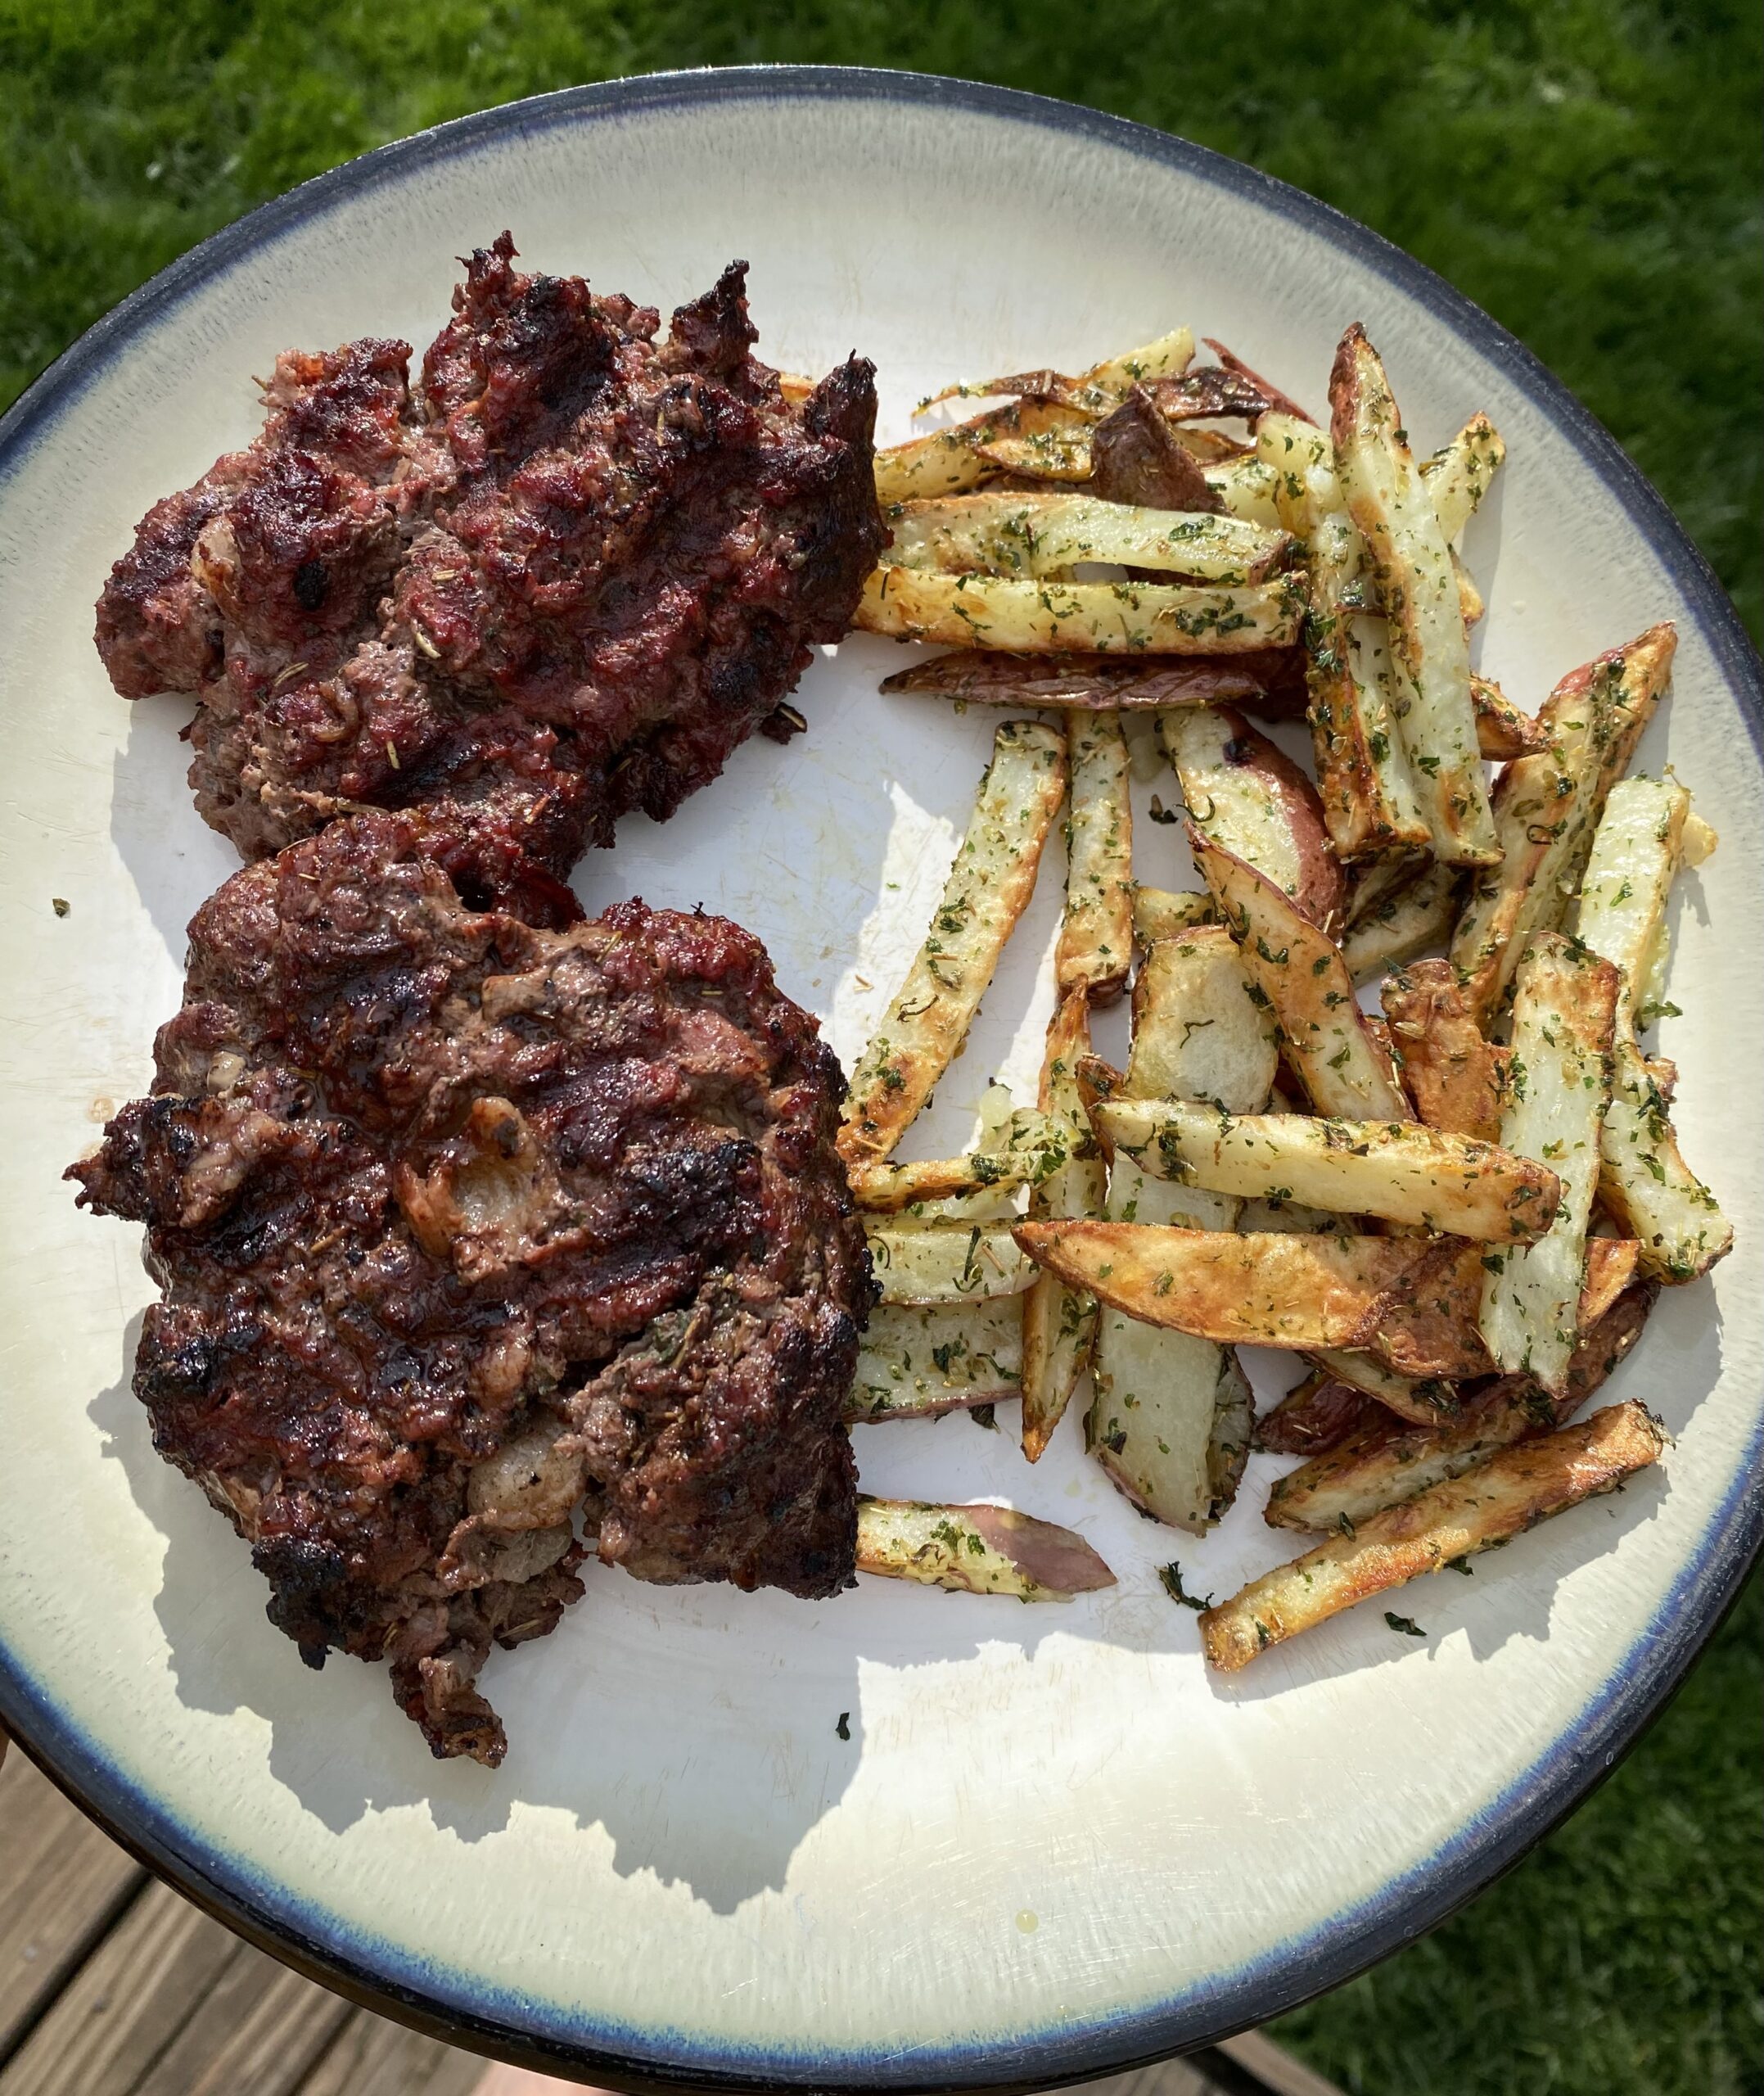 White plate with grass in the background. Plate is full of burgers and fresh potato french fries